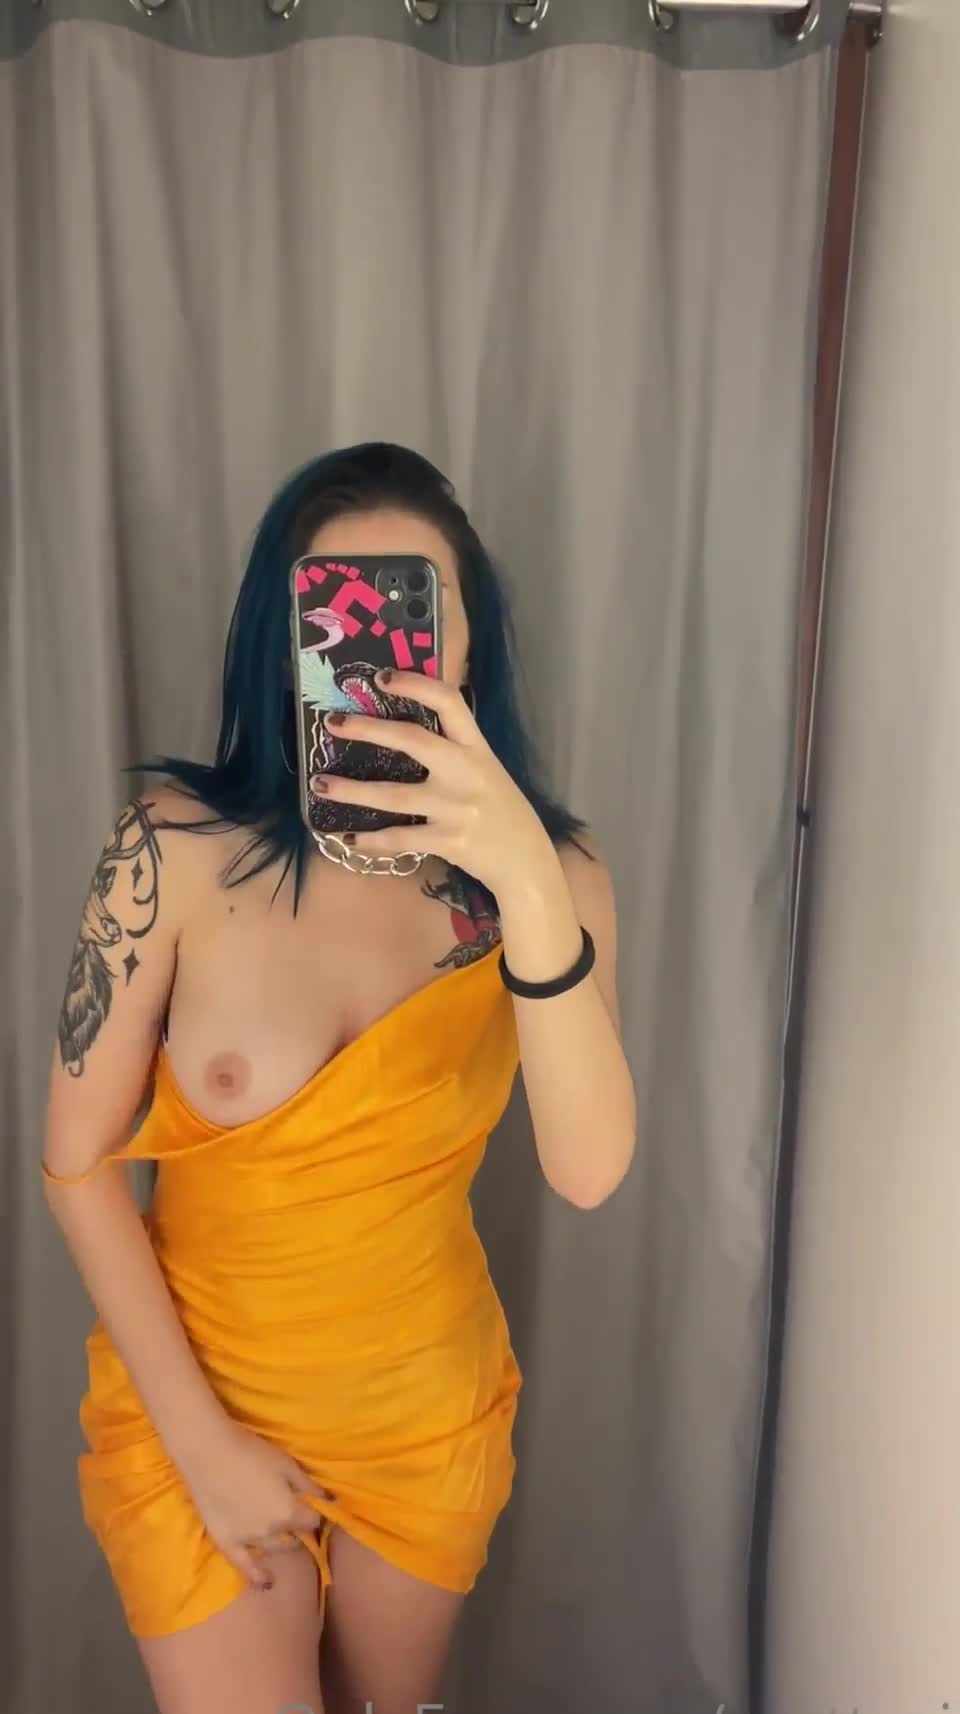 [f] You ever thought about having fun in a fitting room? : video clip